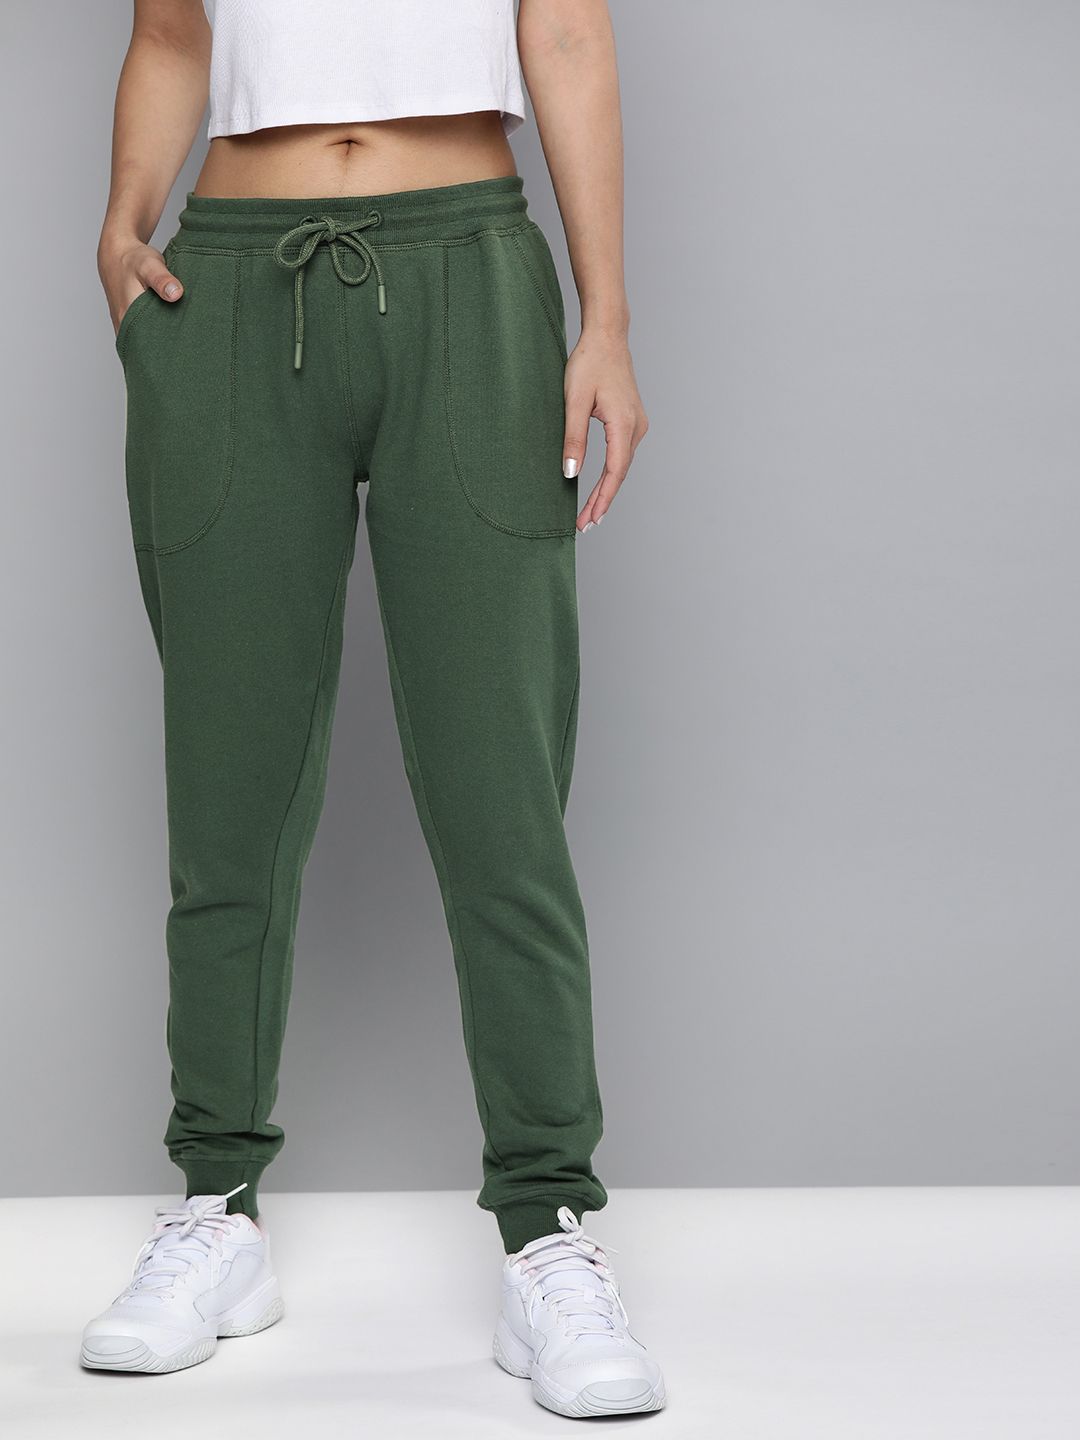 Harvard Woman's Olive Green Solid Track Pants Price in India